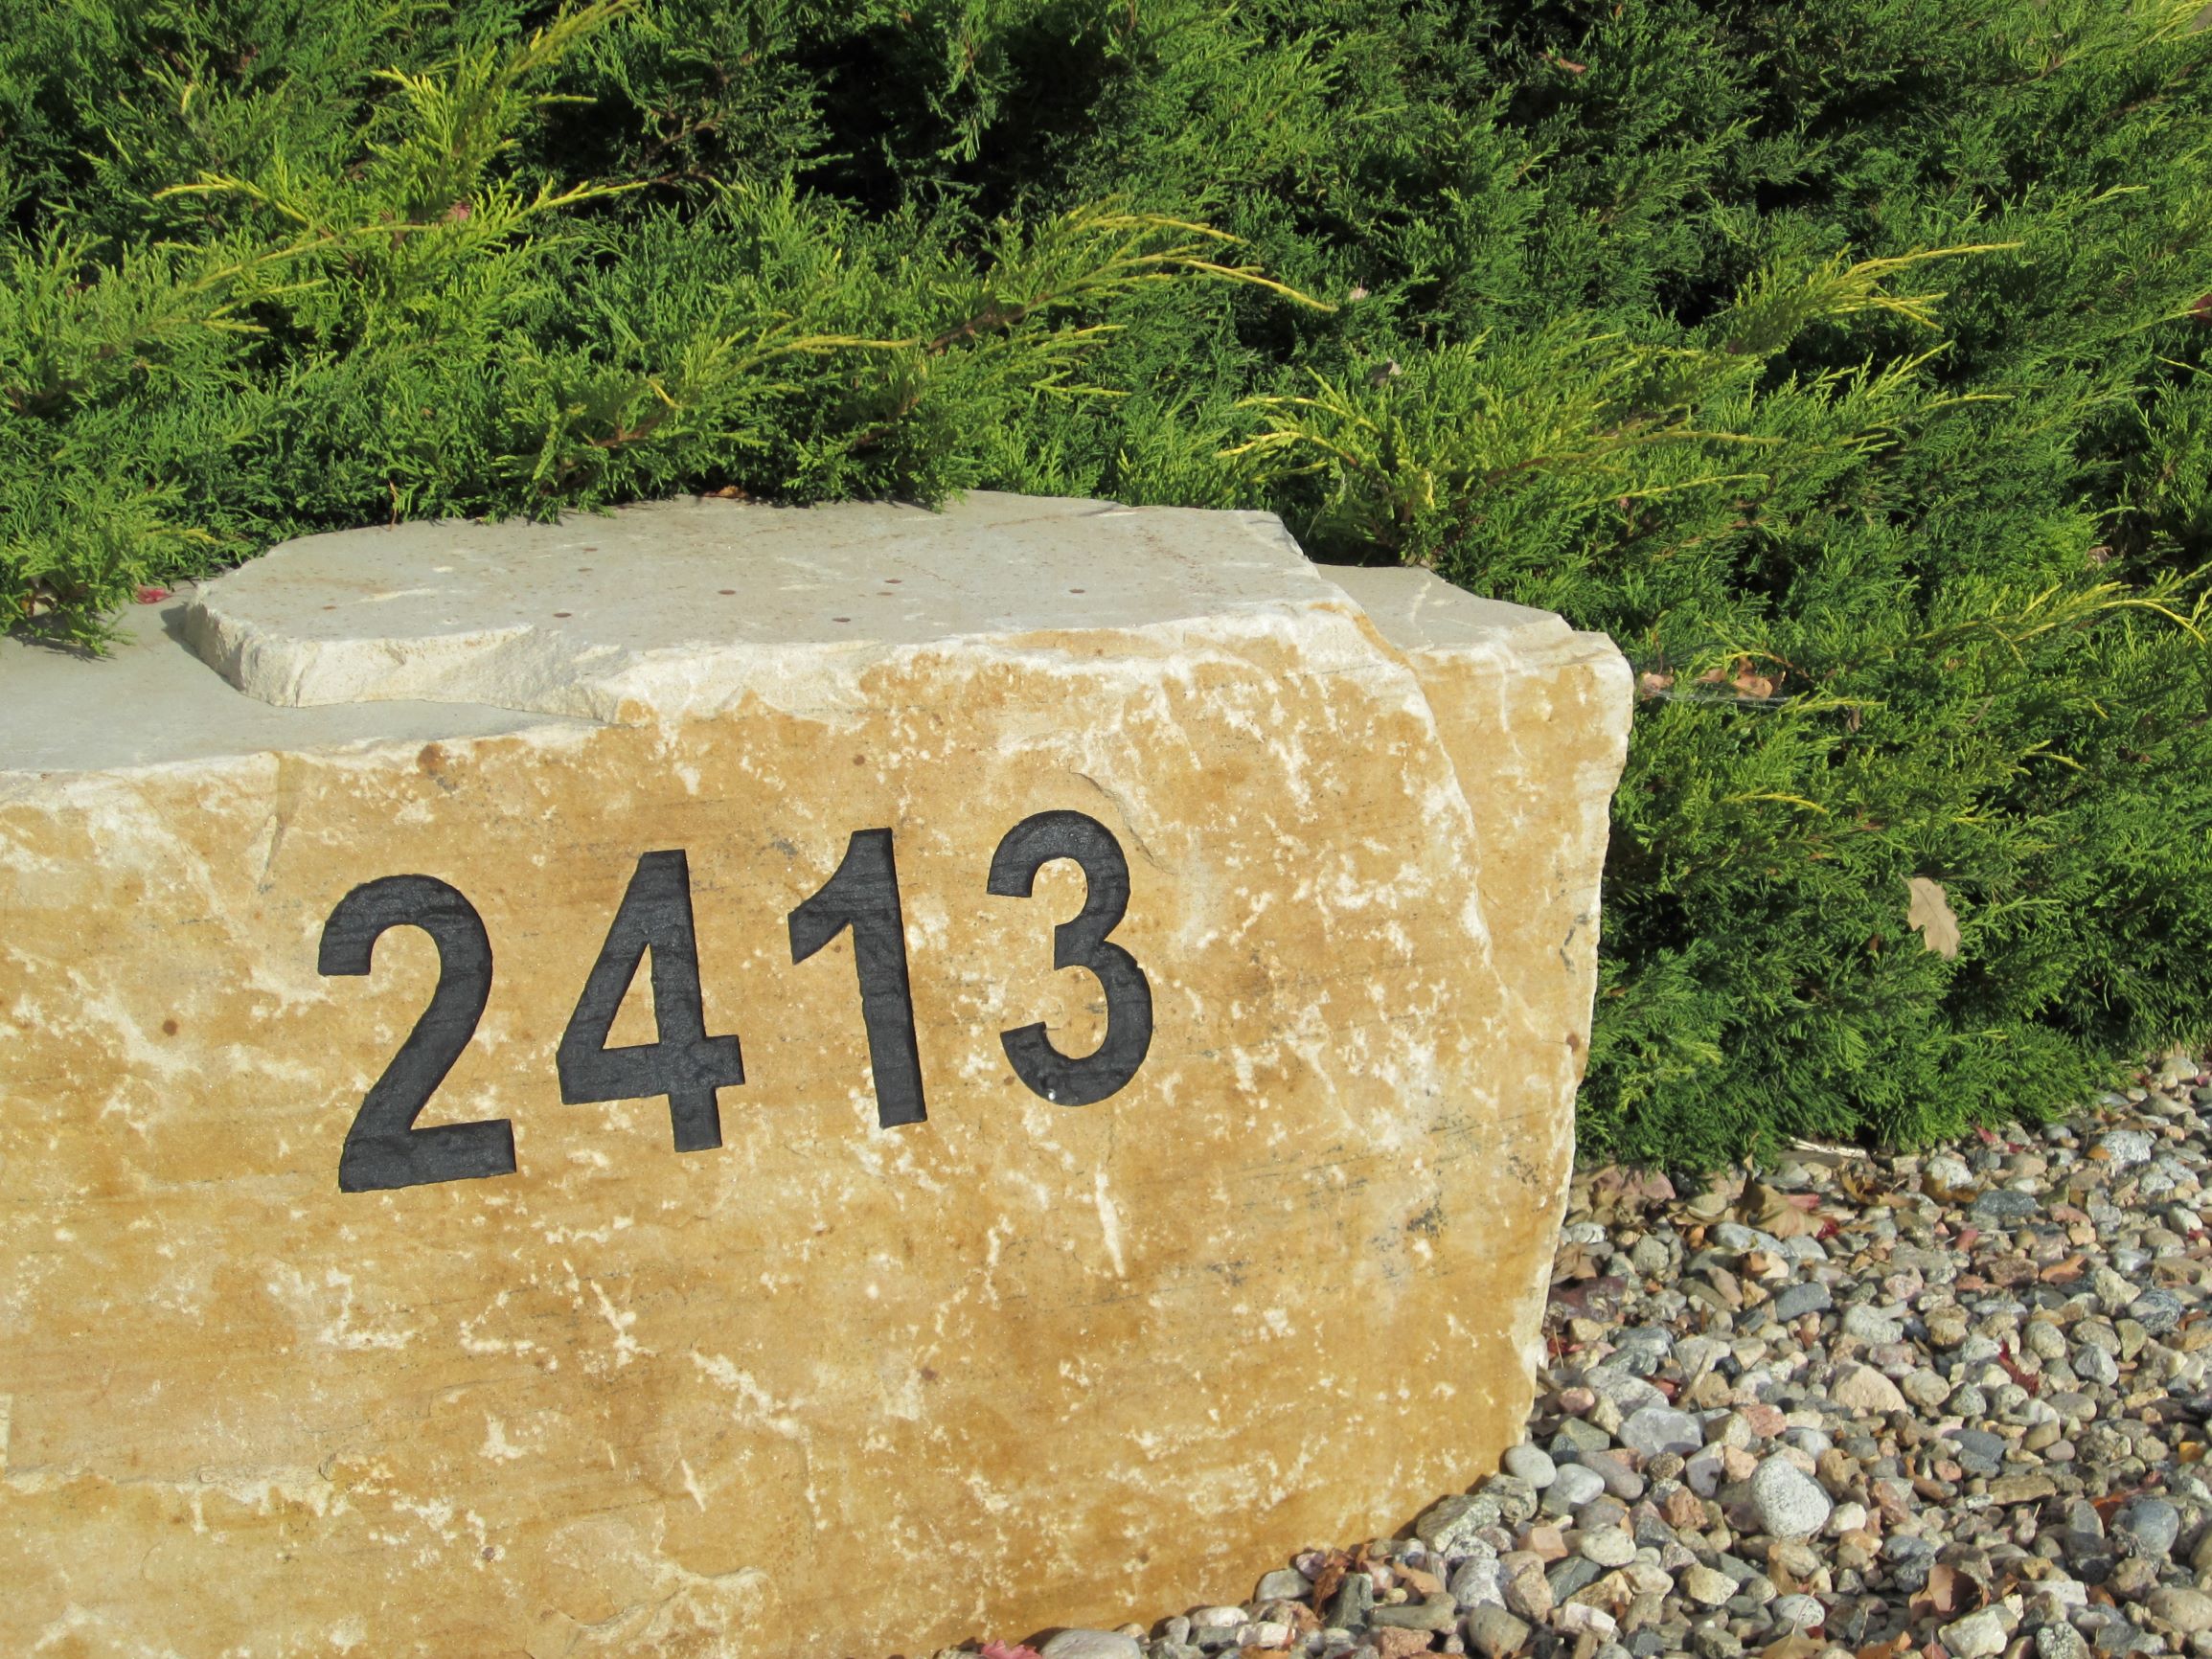 Large decorative rock with address engraved into it.